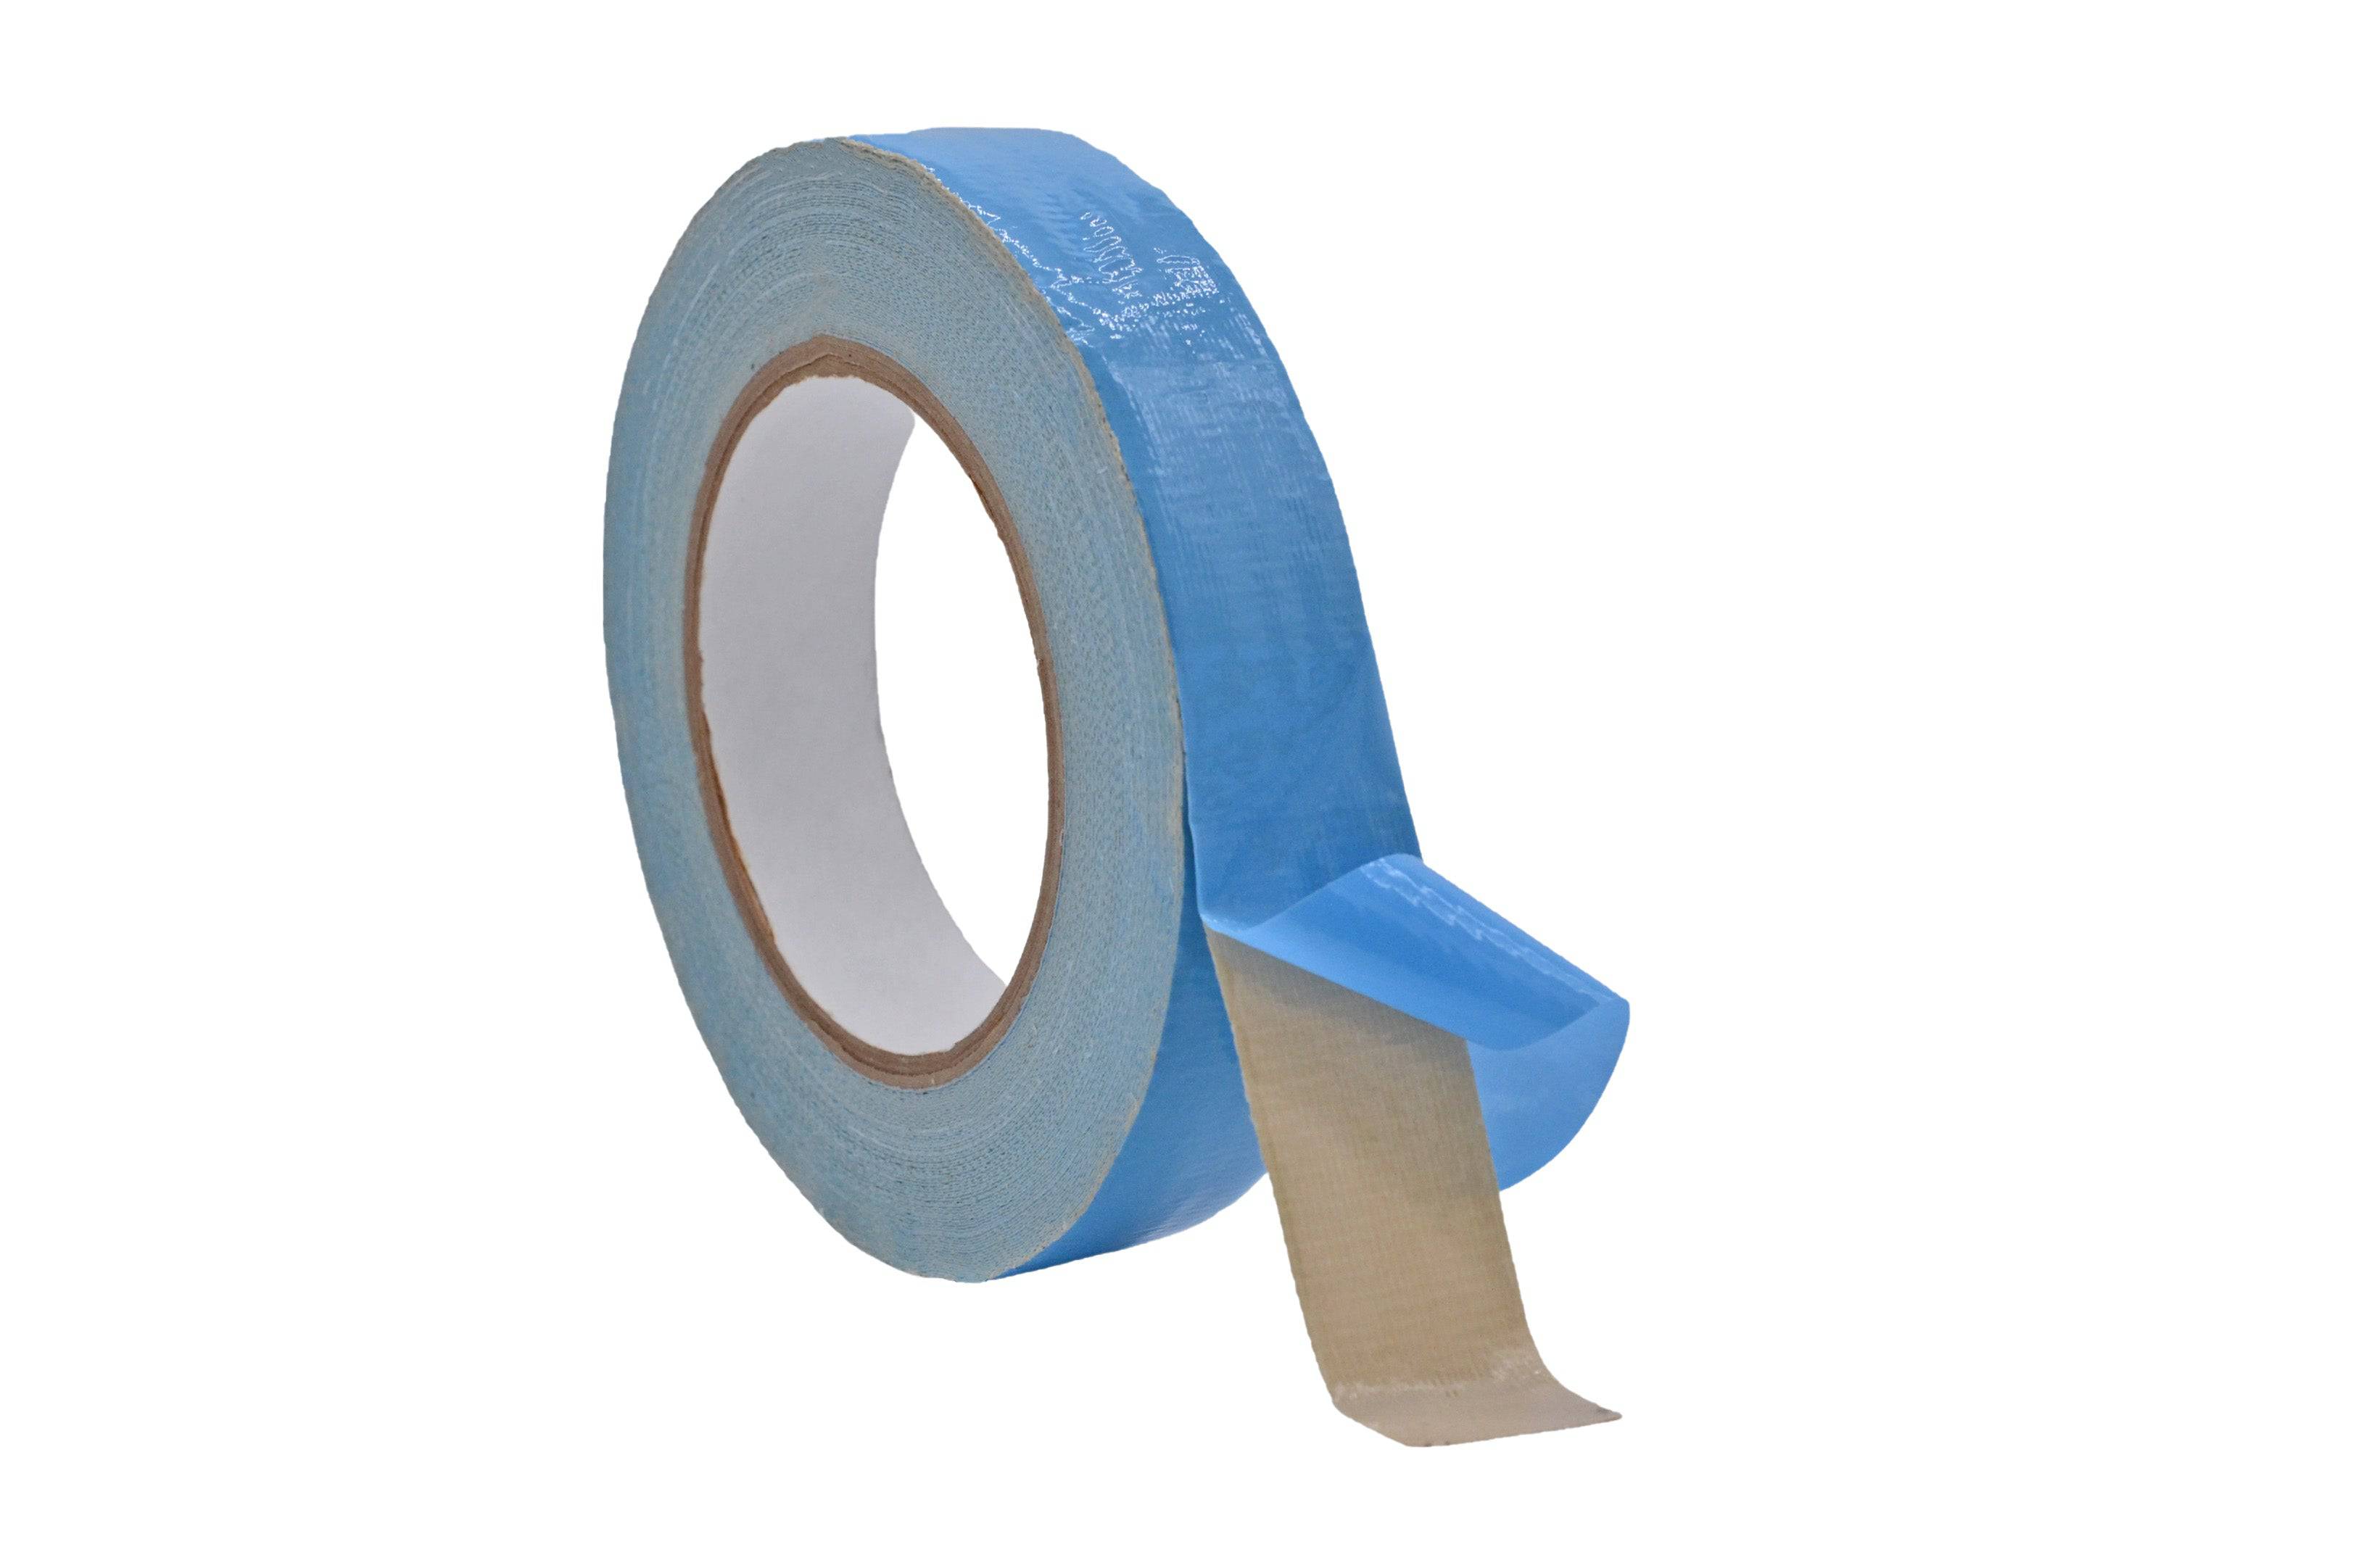 https://tapeproviders.com/cdn/shop/files/double-sided-cloth-tape-1-inch-25-yards-wod-double-sided-cloth-tape-11-mil-natural-rubber-adhesive-for-laying-down-carpet-leaving-no-residue-dcct110r-37901449461995.jpg?v=1696297447